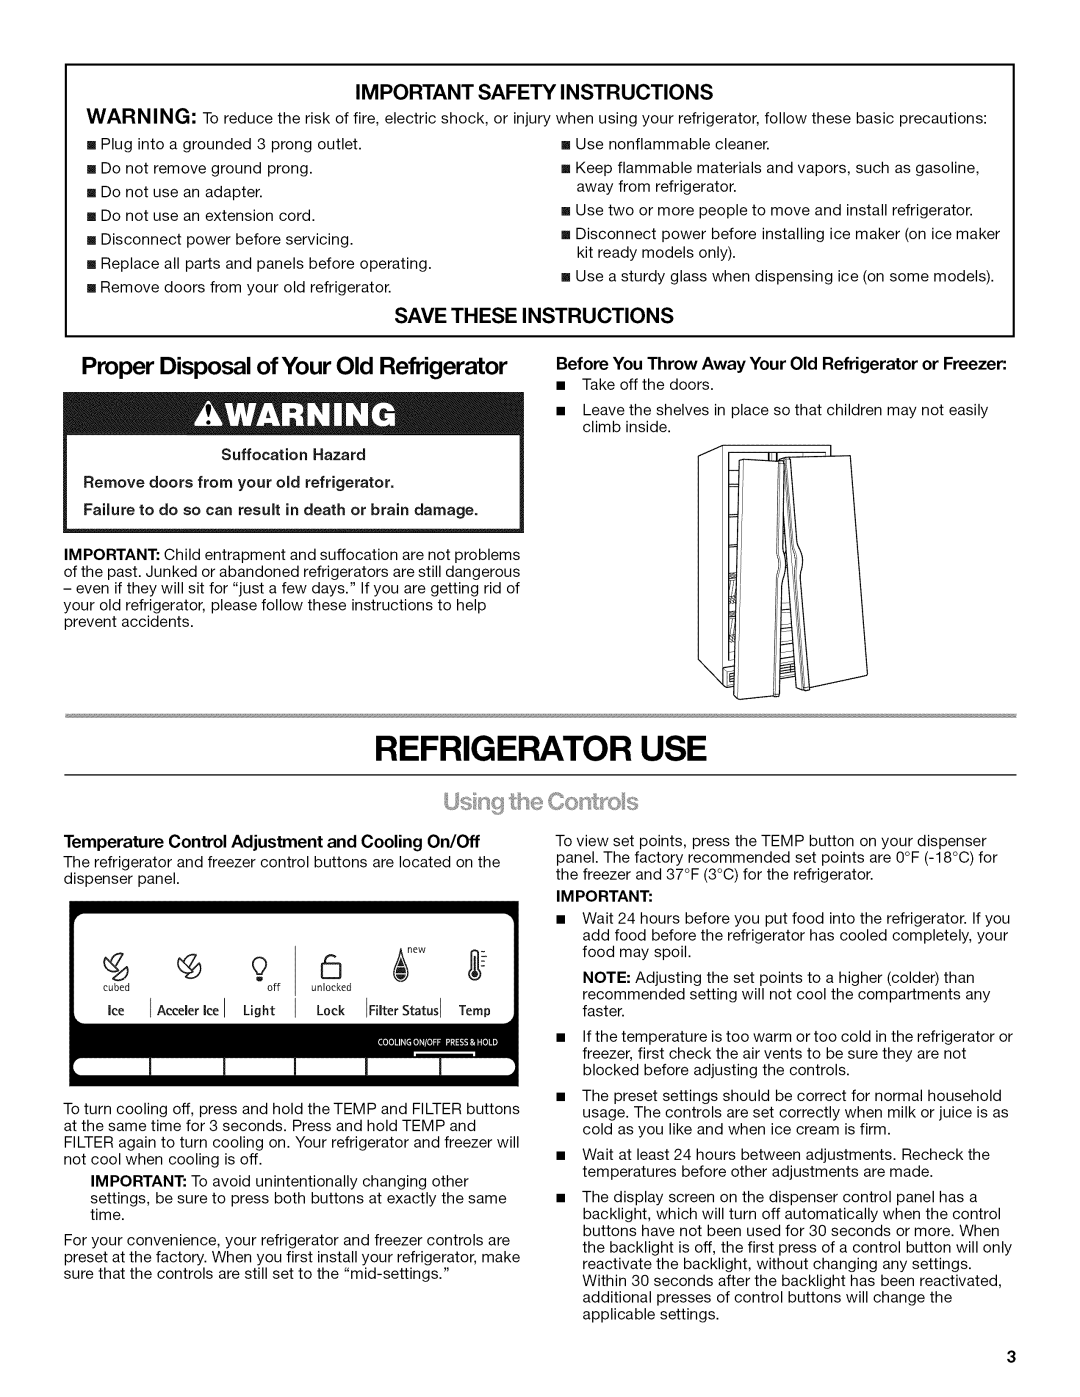 Kenmore 10645423800 Refrigerator Use, Proper Disposal of Your Old Refrigerator, Important Safety Instructions, Save These 